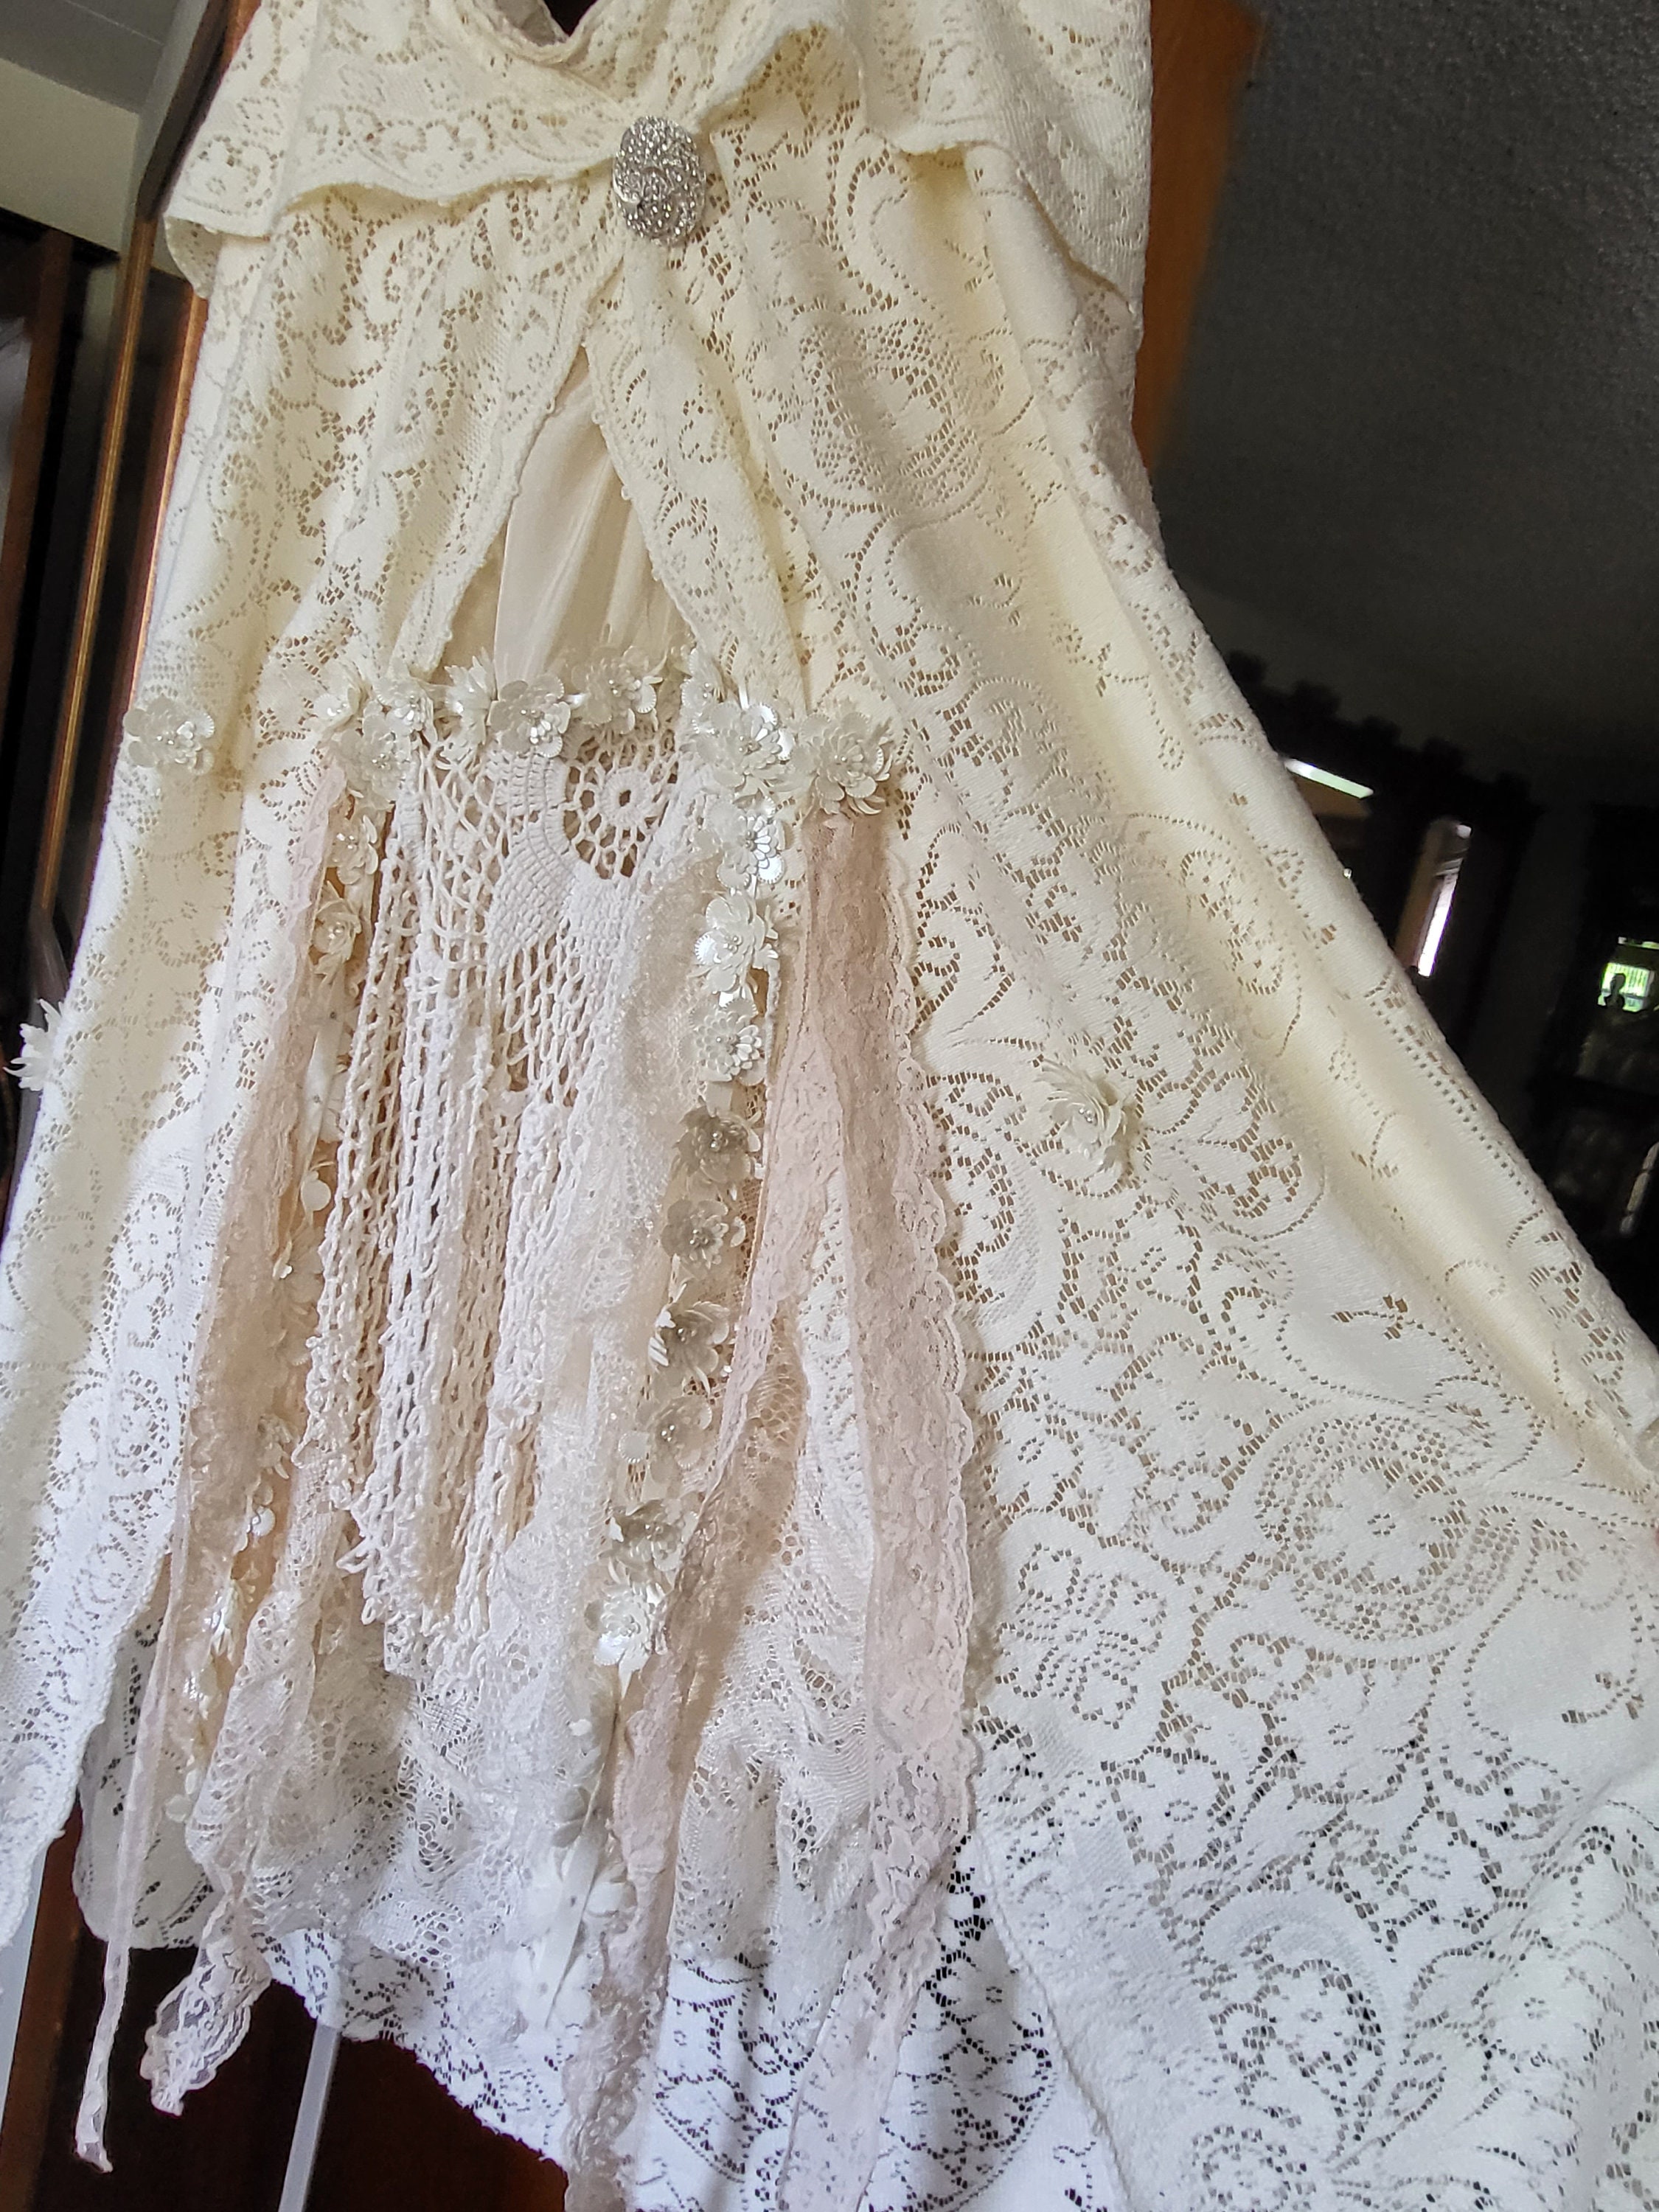 Lace Wedding Skirt by Arlettemichelle - Etsy